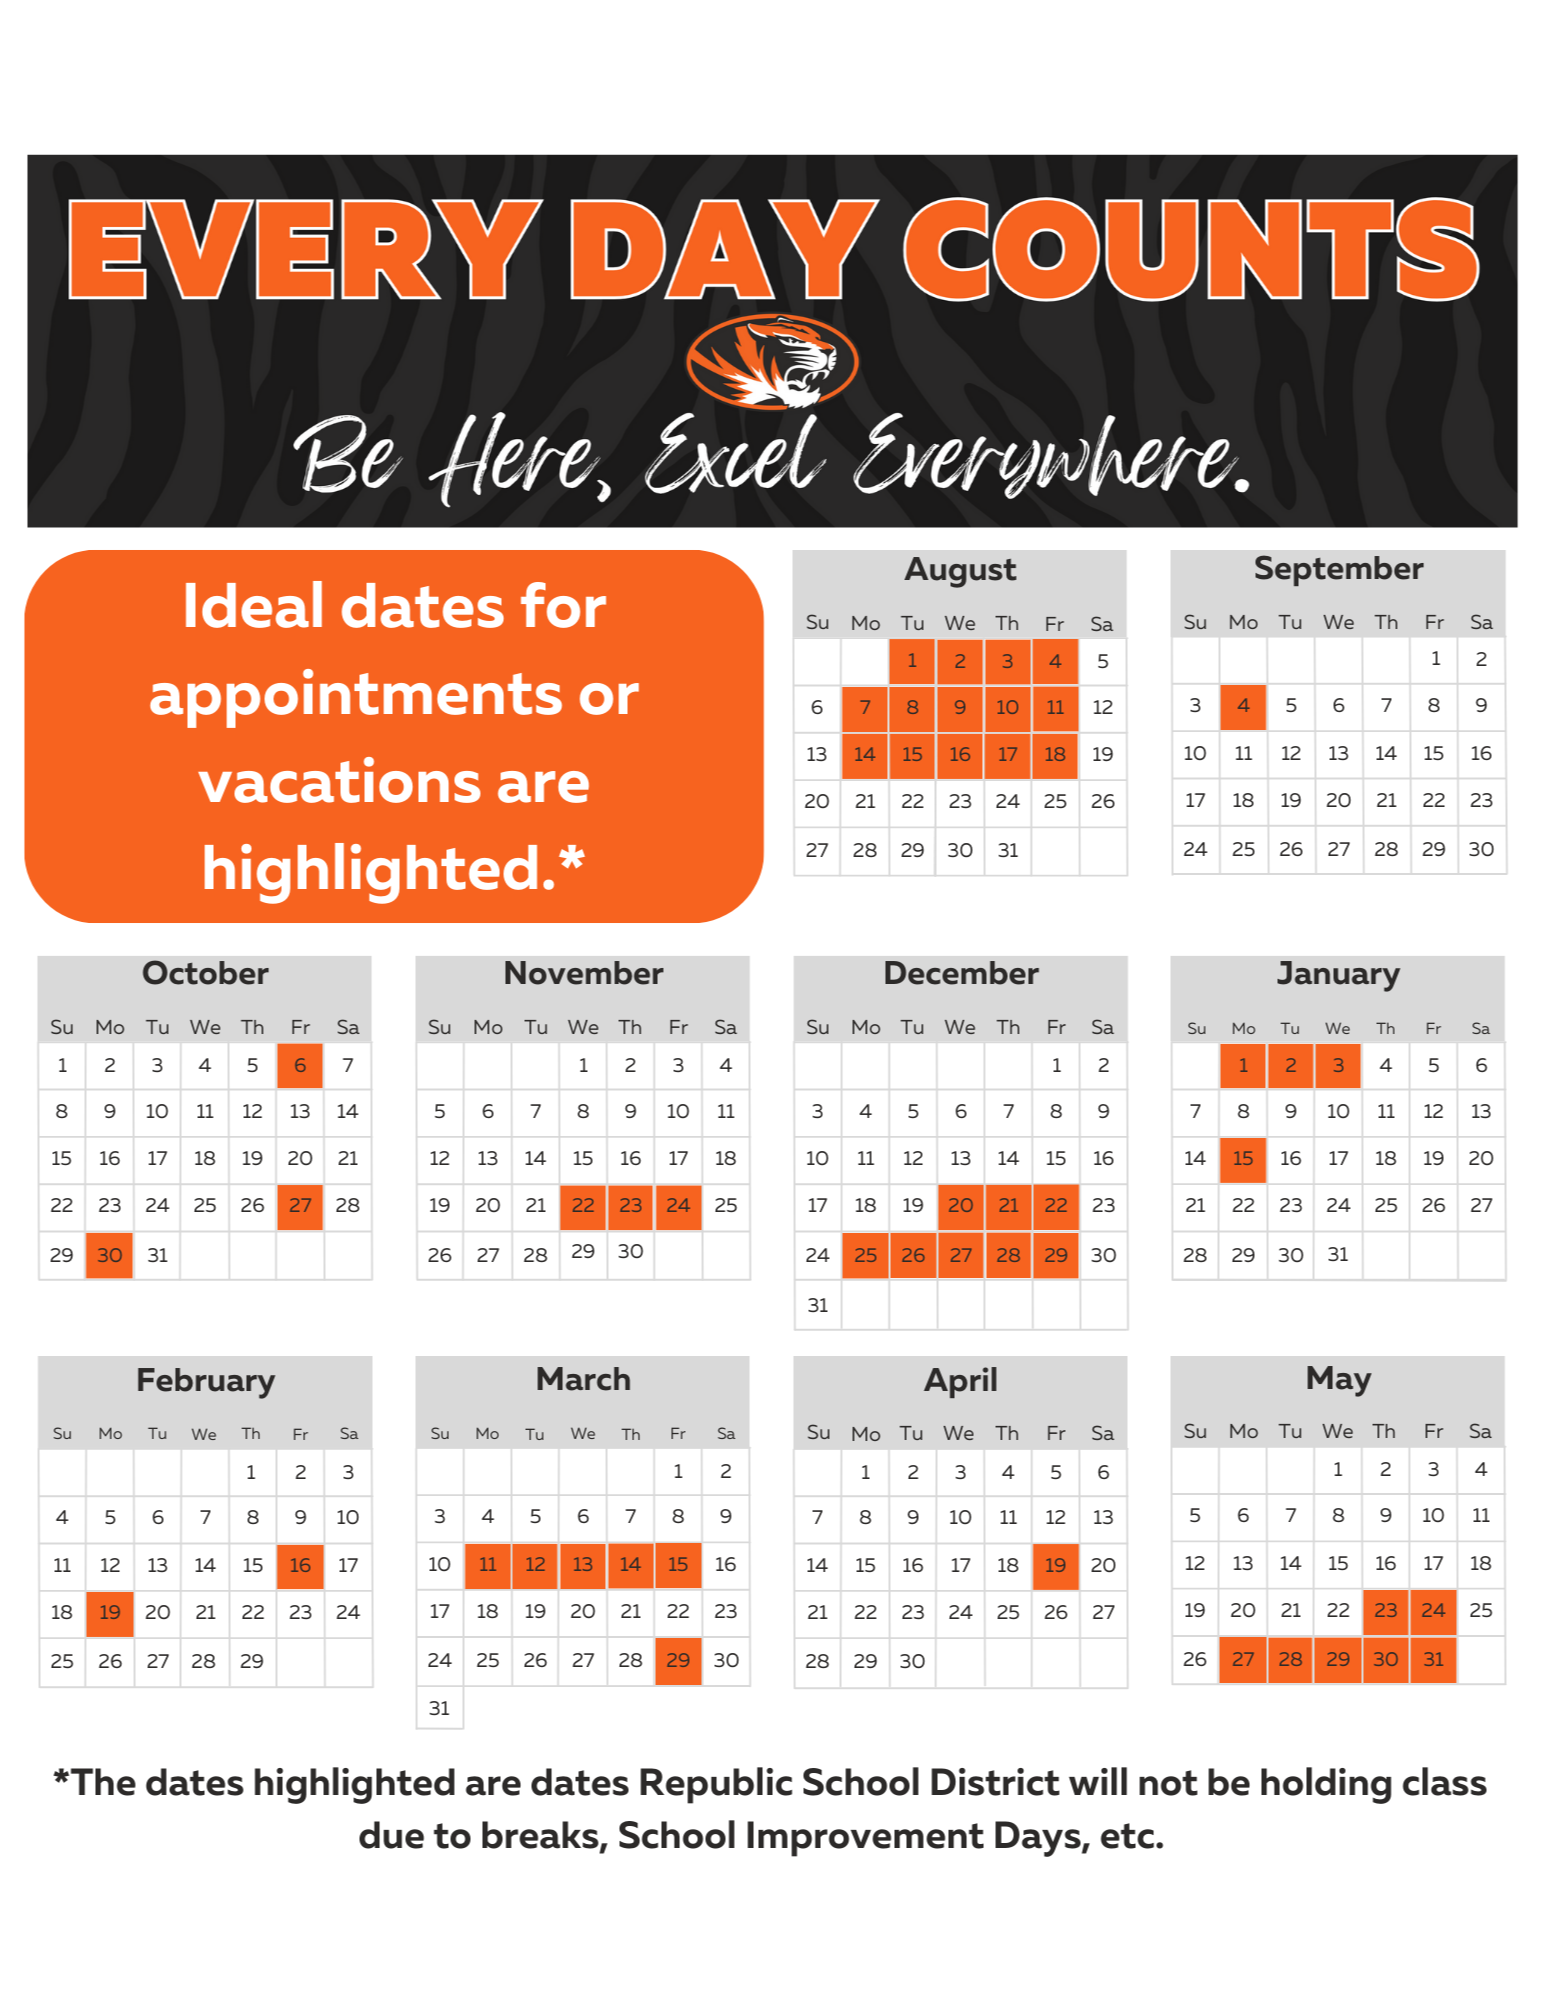 Calendar of ideal dates for when families could take students out of school for vacations or appointments